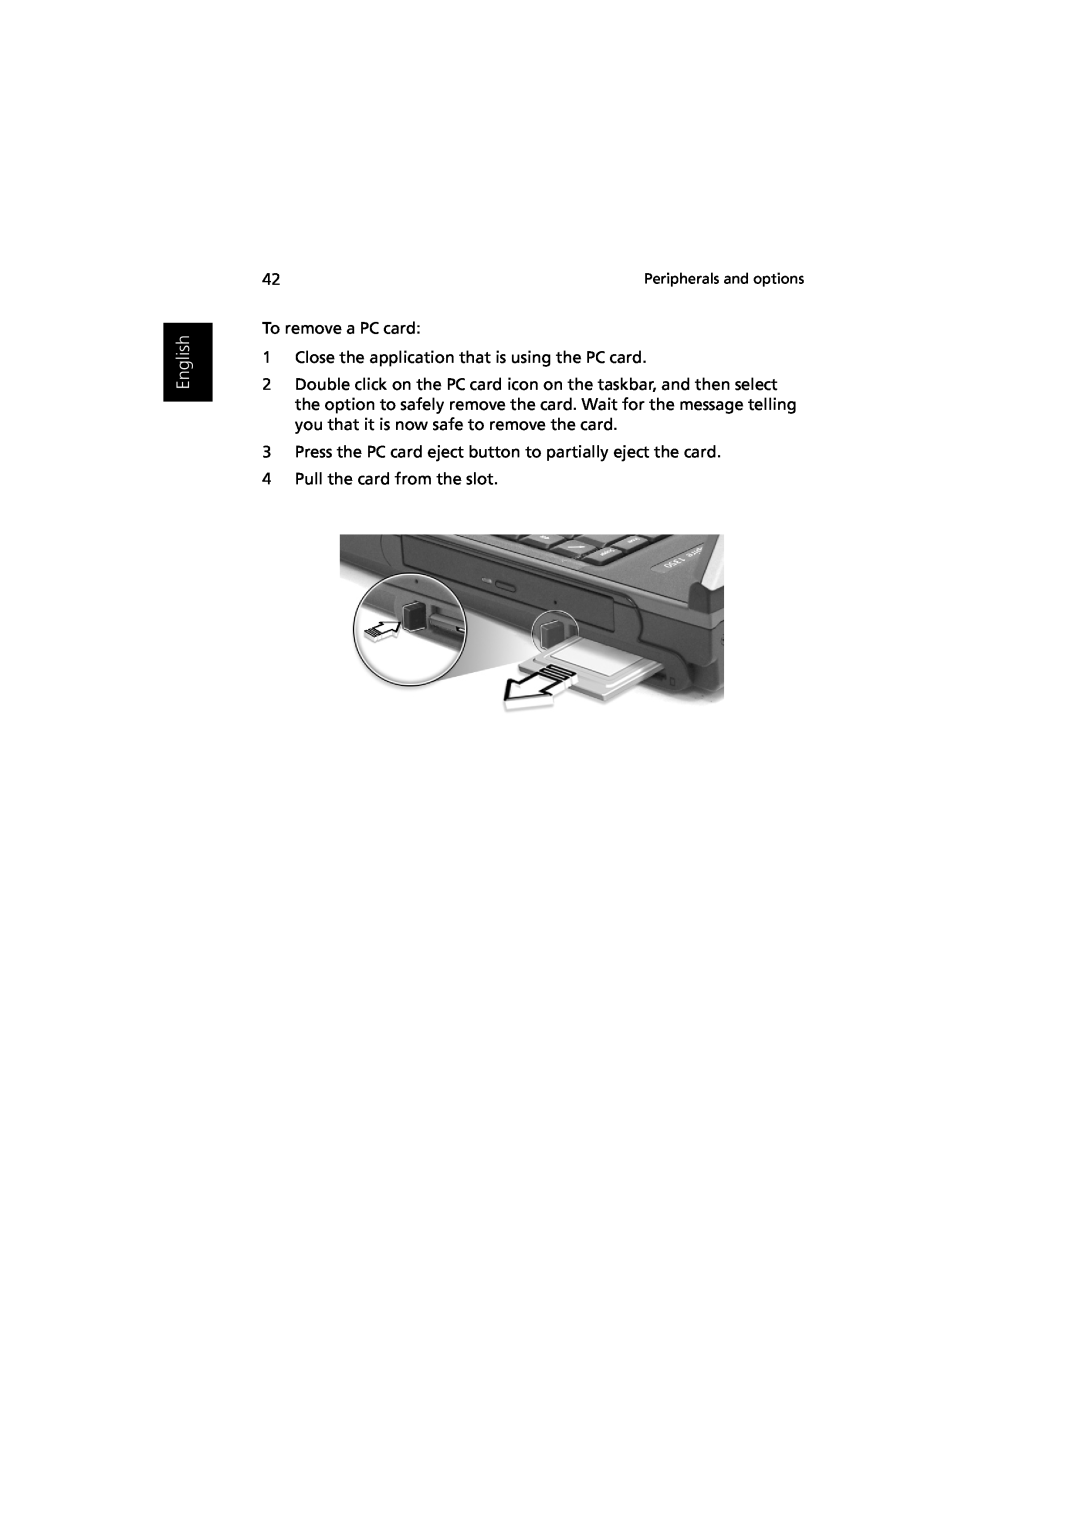 Acer Aspire 1350 manual English, To remove a PC card 1 Close the application that is using the PC card 